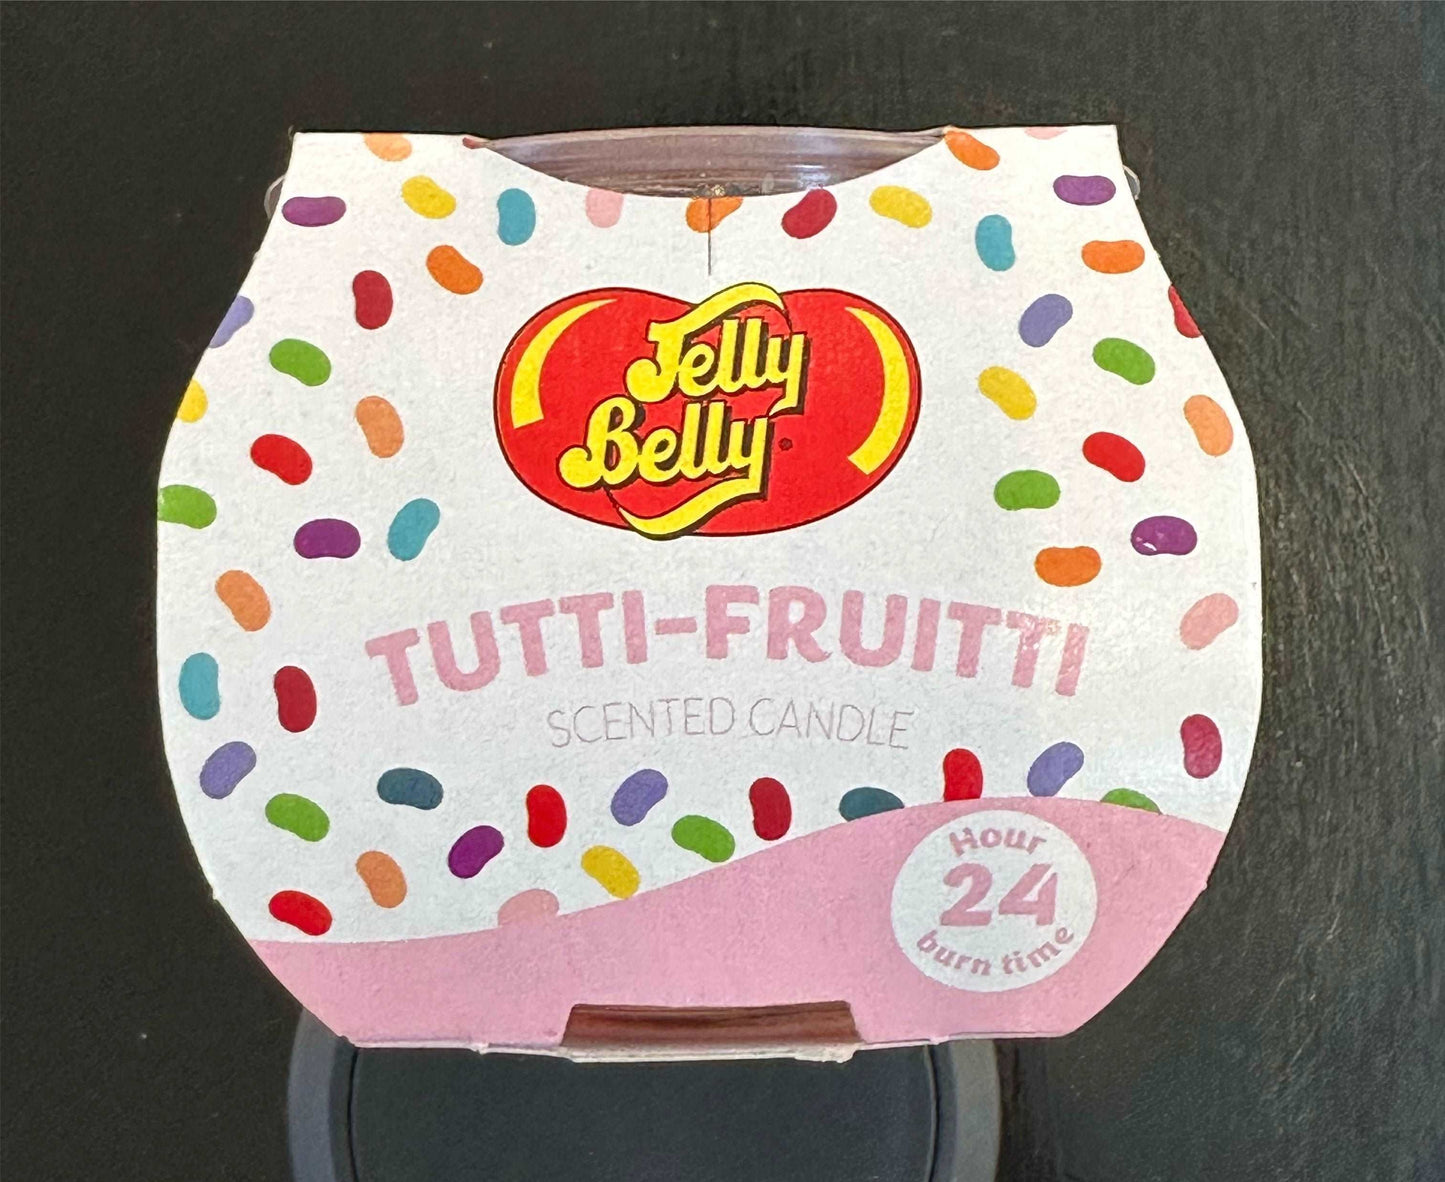 Jelly Belly Candle (S) French Vanilla candle jelly belly